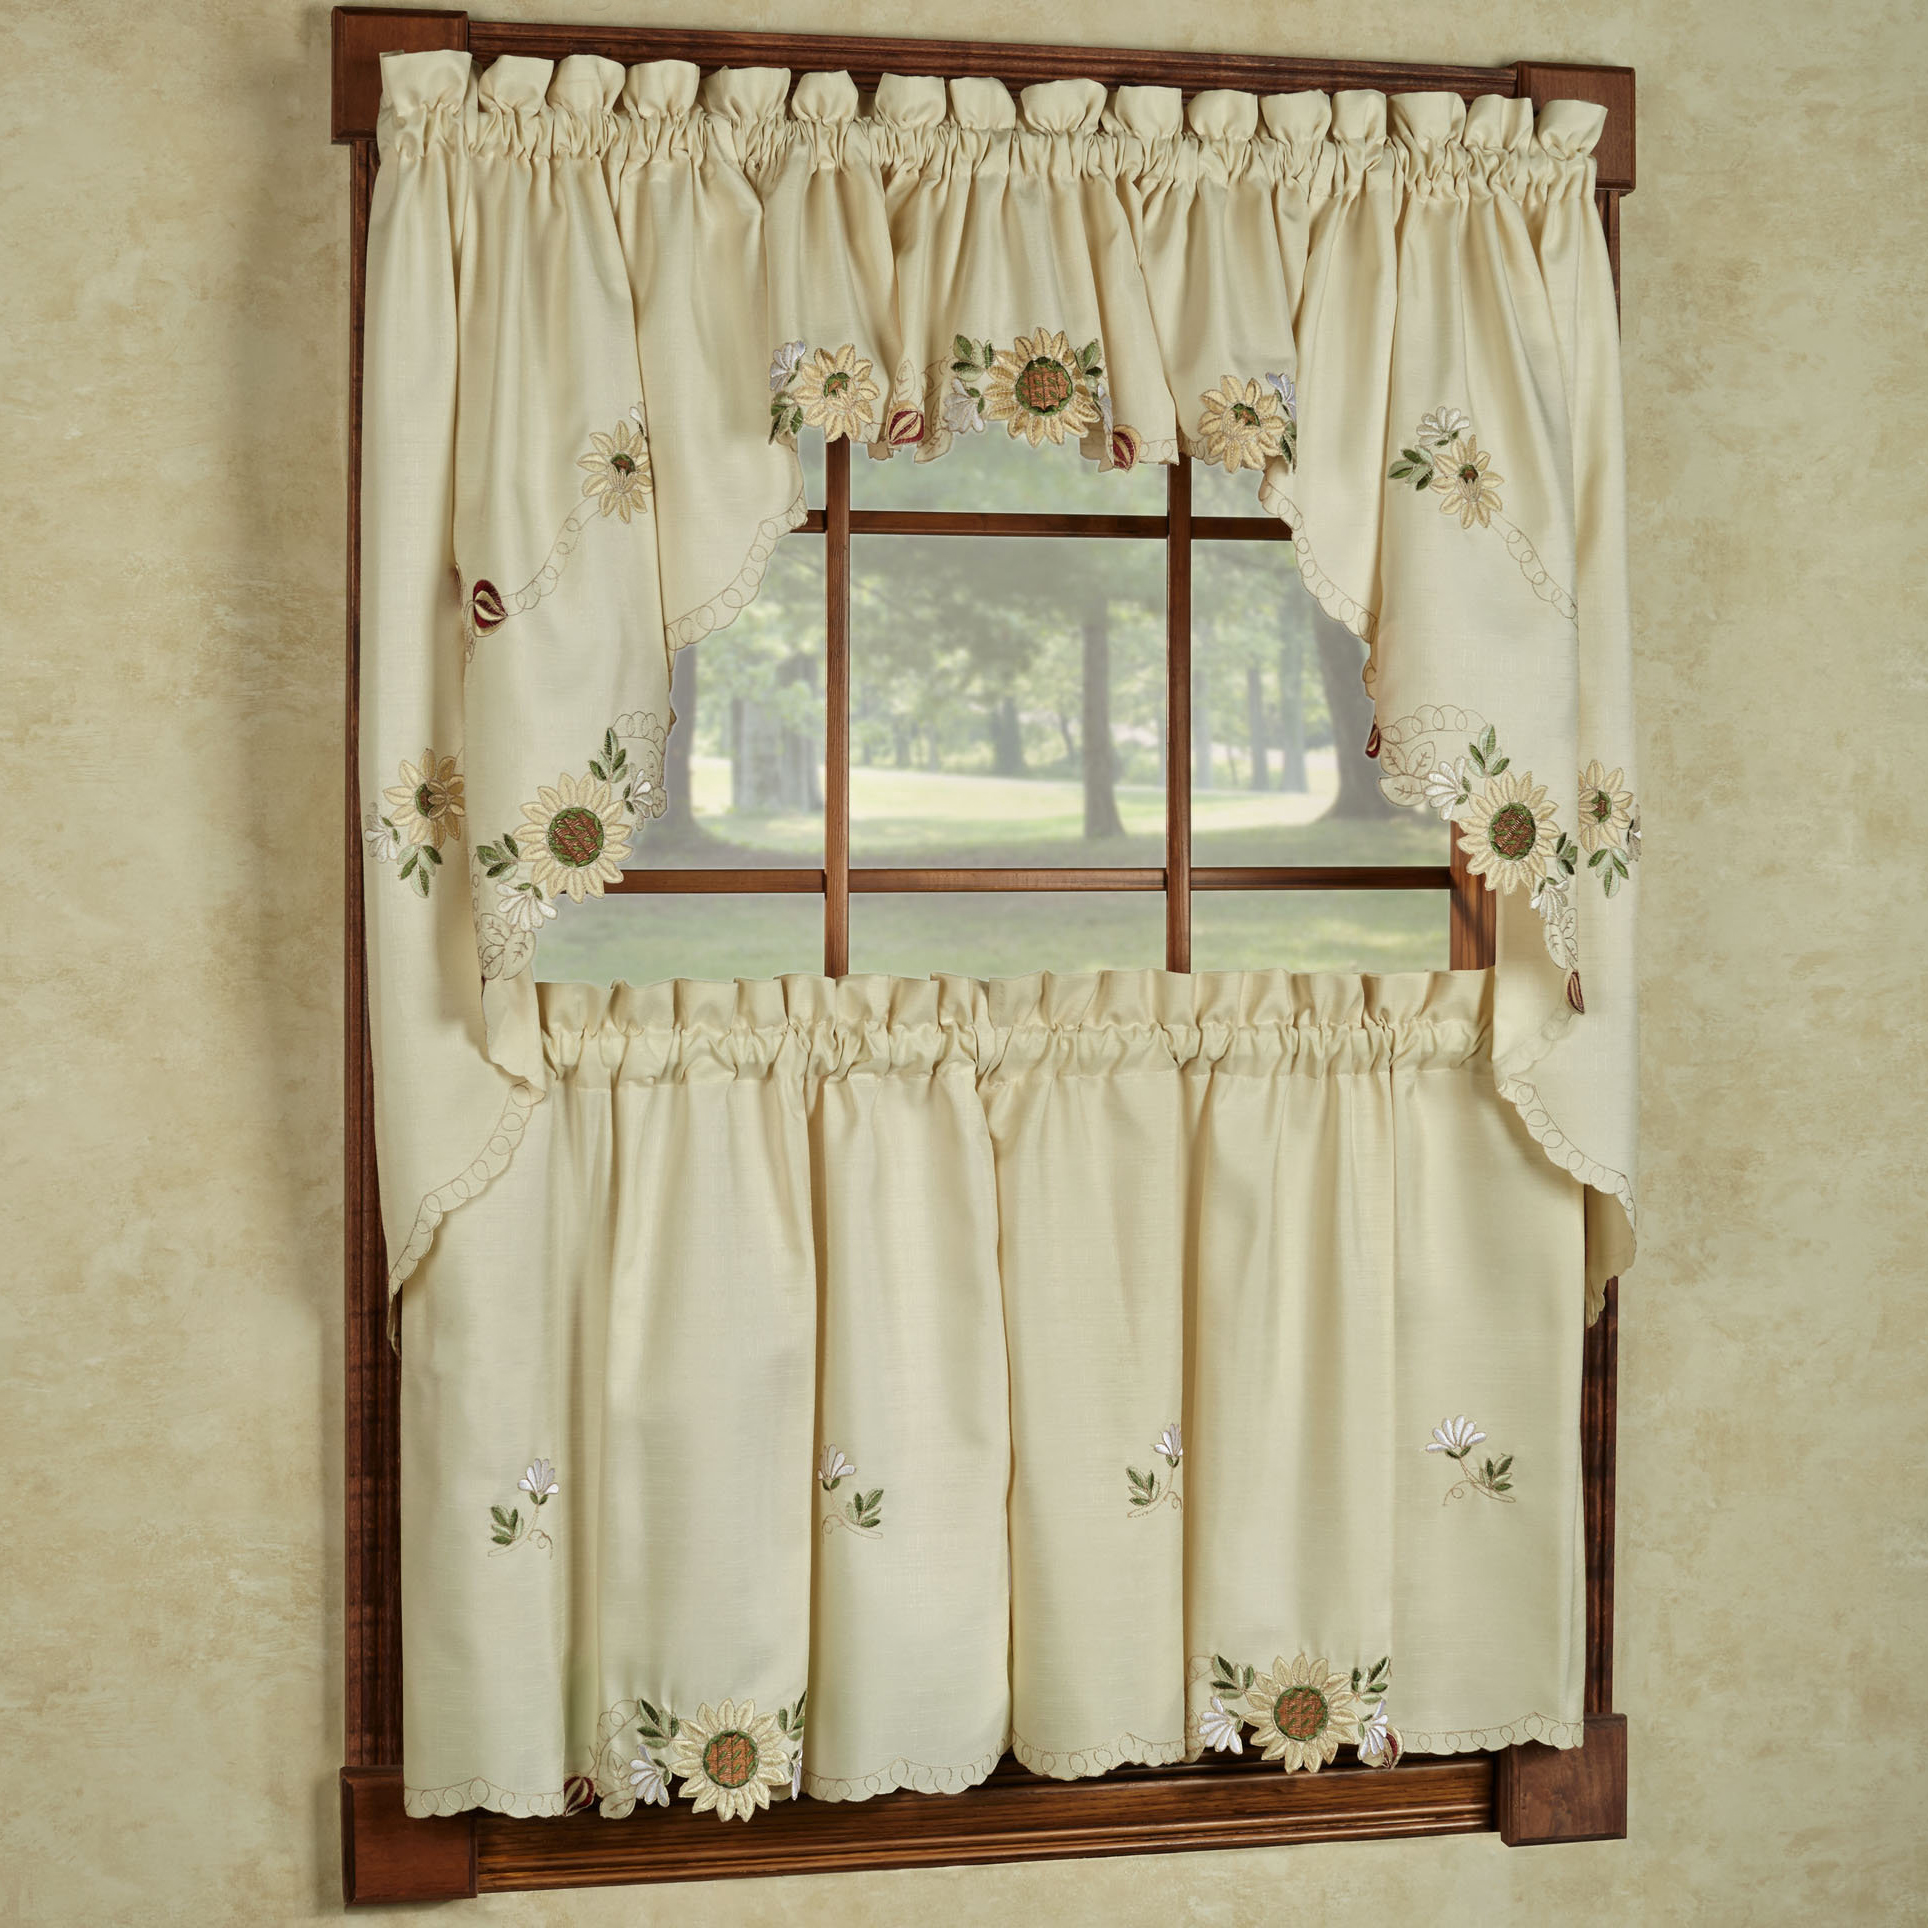 Sunflower Cream Embroidered Kitchen Curtains Tiers Valance Or Swag